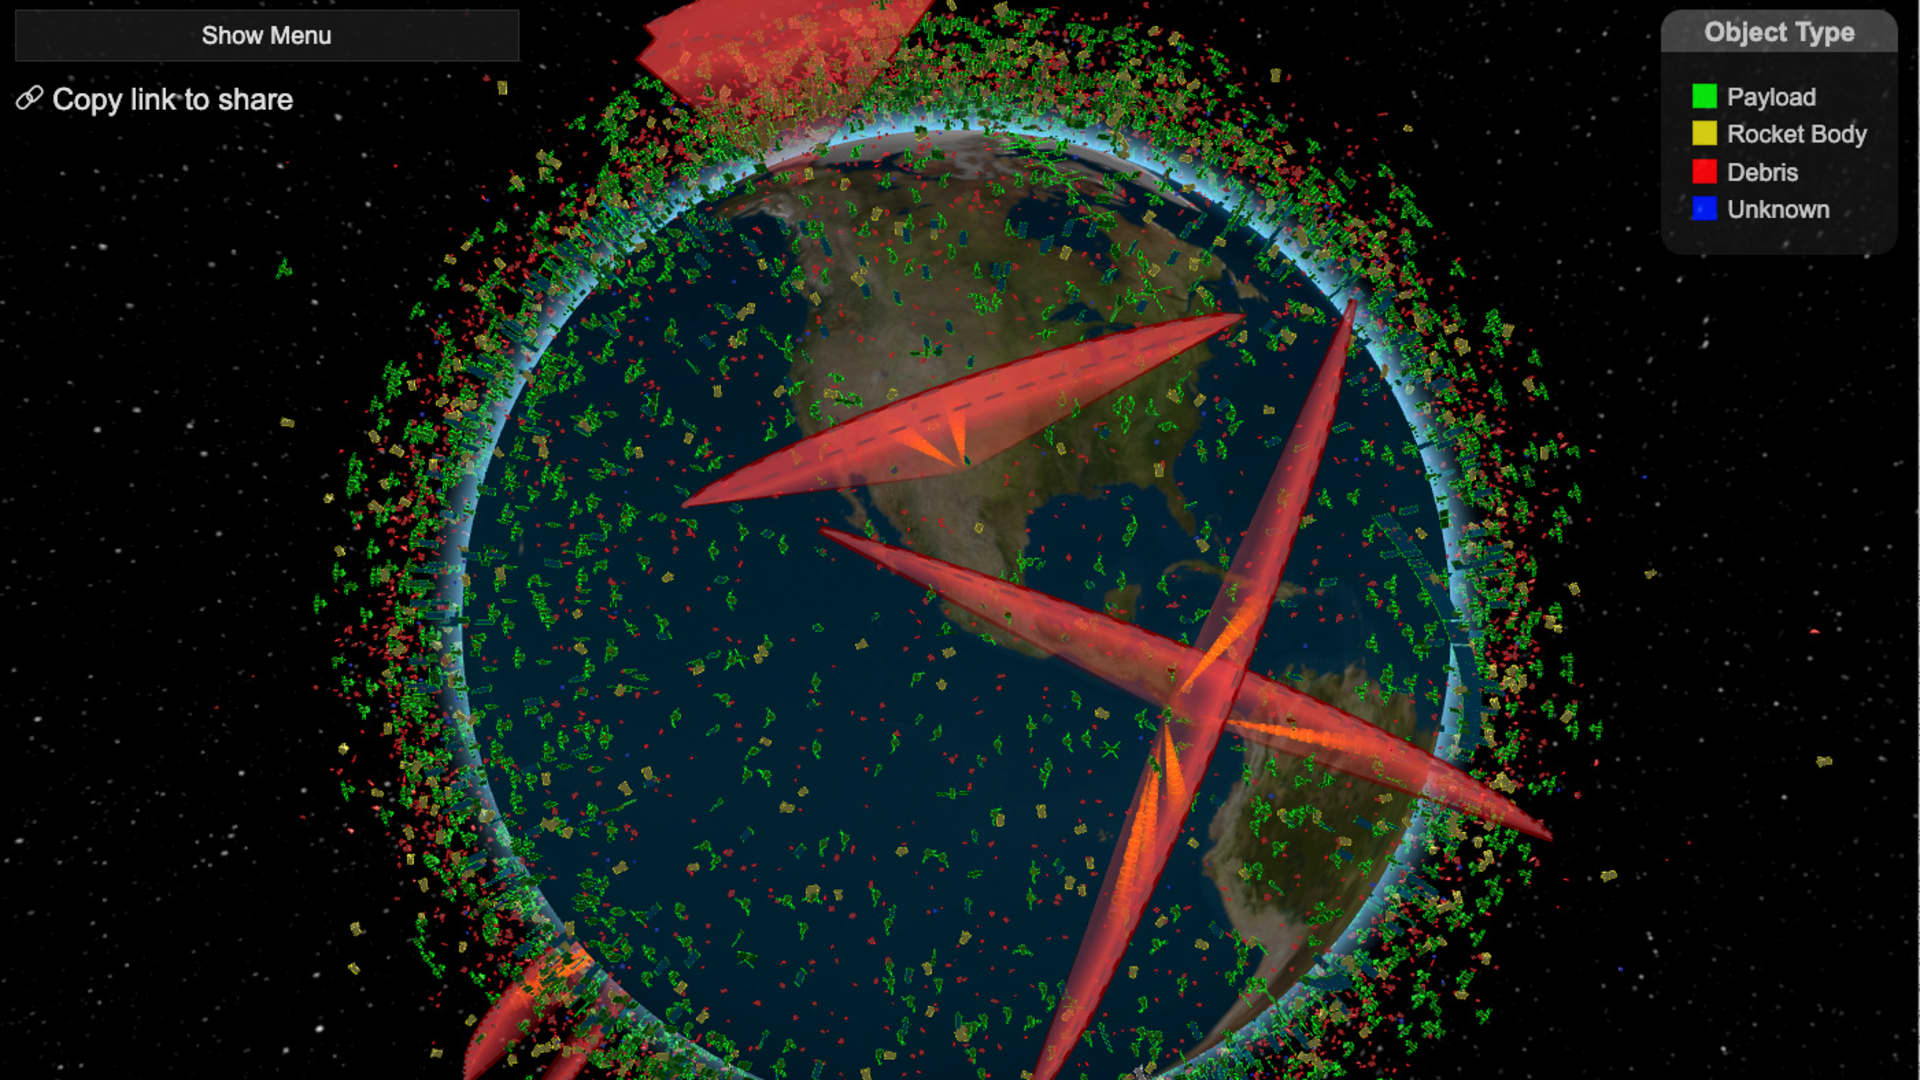 A visualization of objects in low Earth orbit, including active satellites, discarded rocket bodies, and debris.